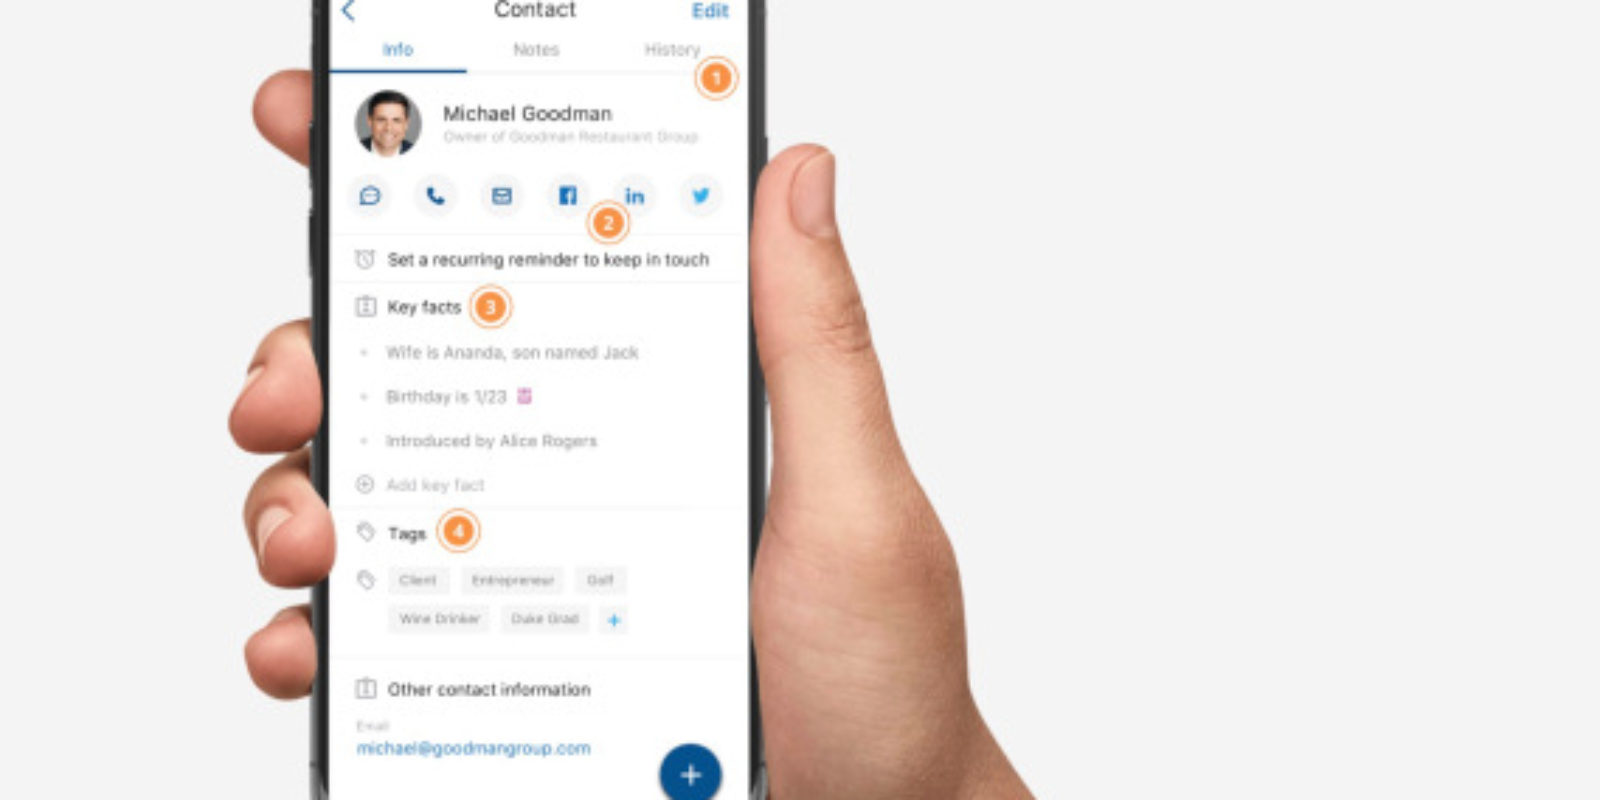 Levitate raises $6M for its ‘keep-in-touch’ email marketing solution aimed at smaller businesses